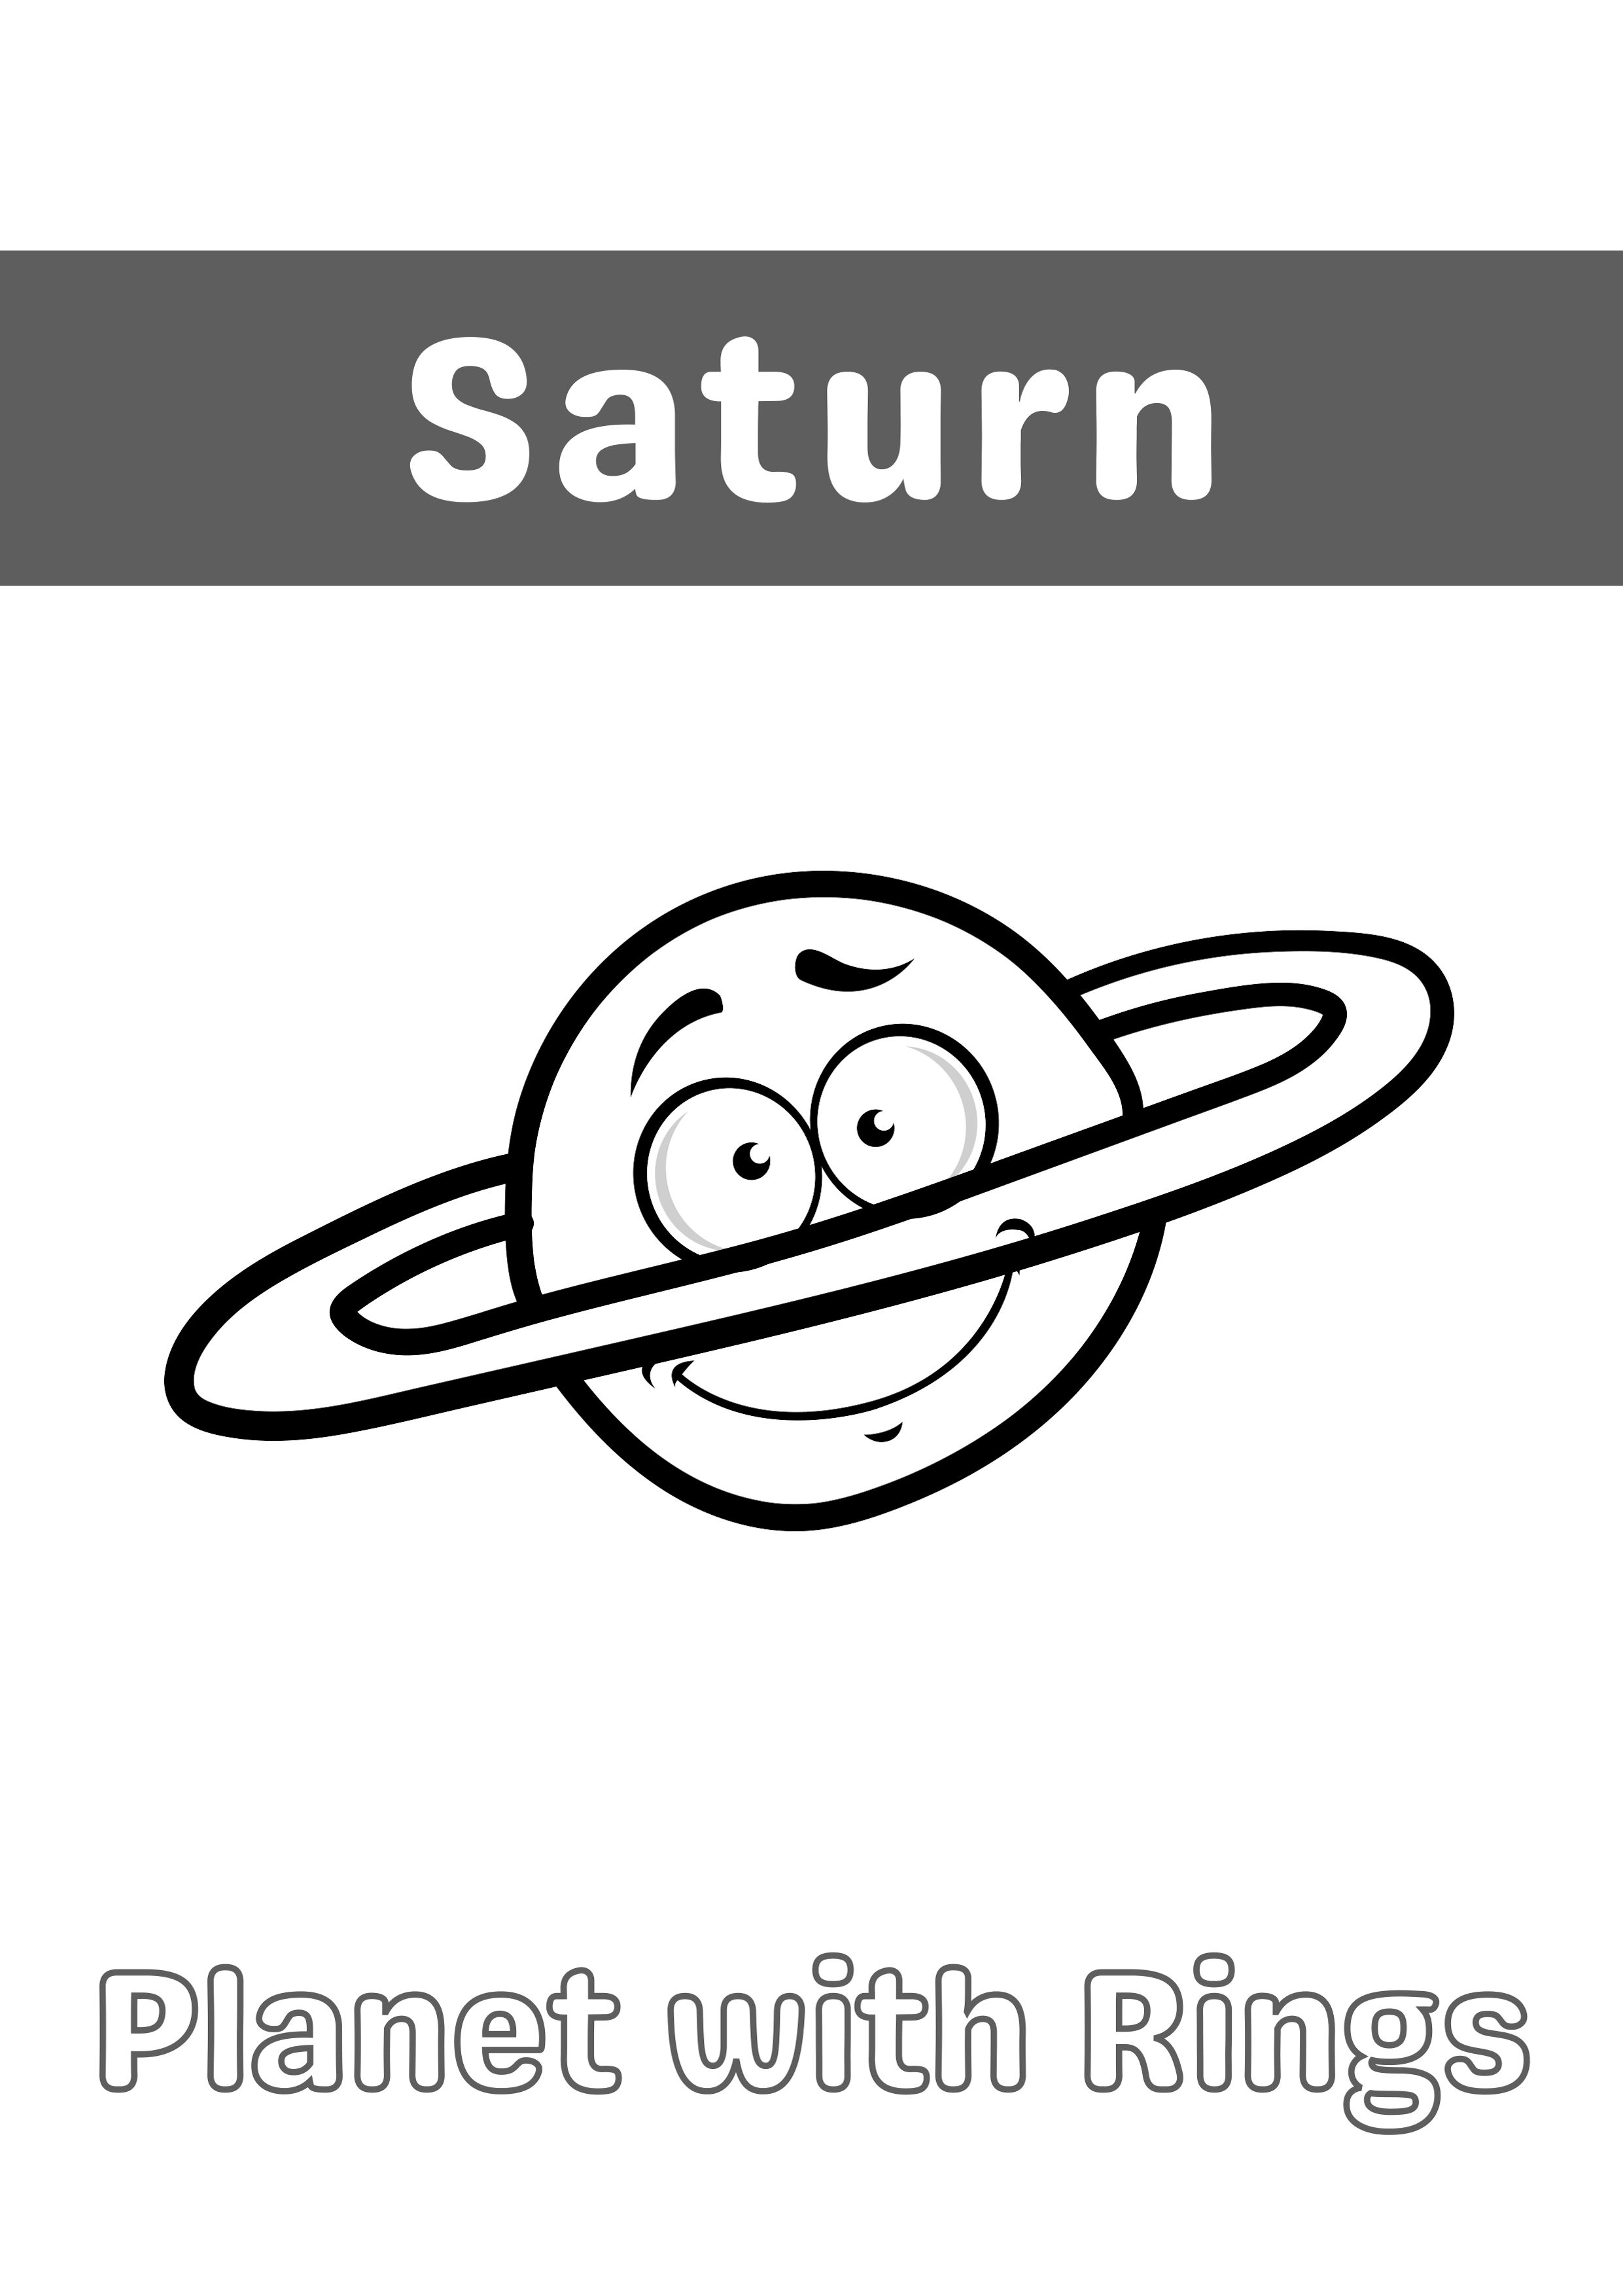 Saturn Coloring Book for Kids Template preview image.